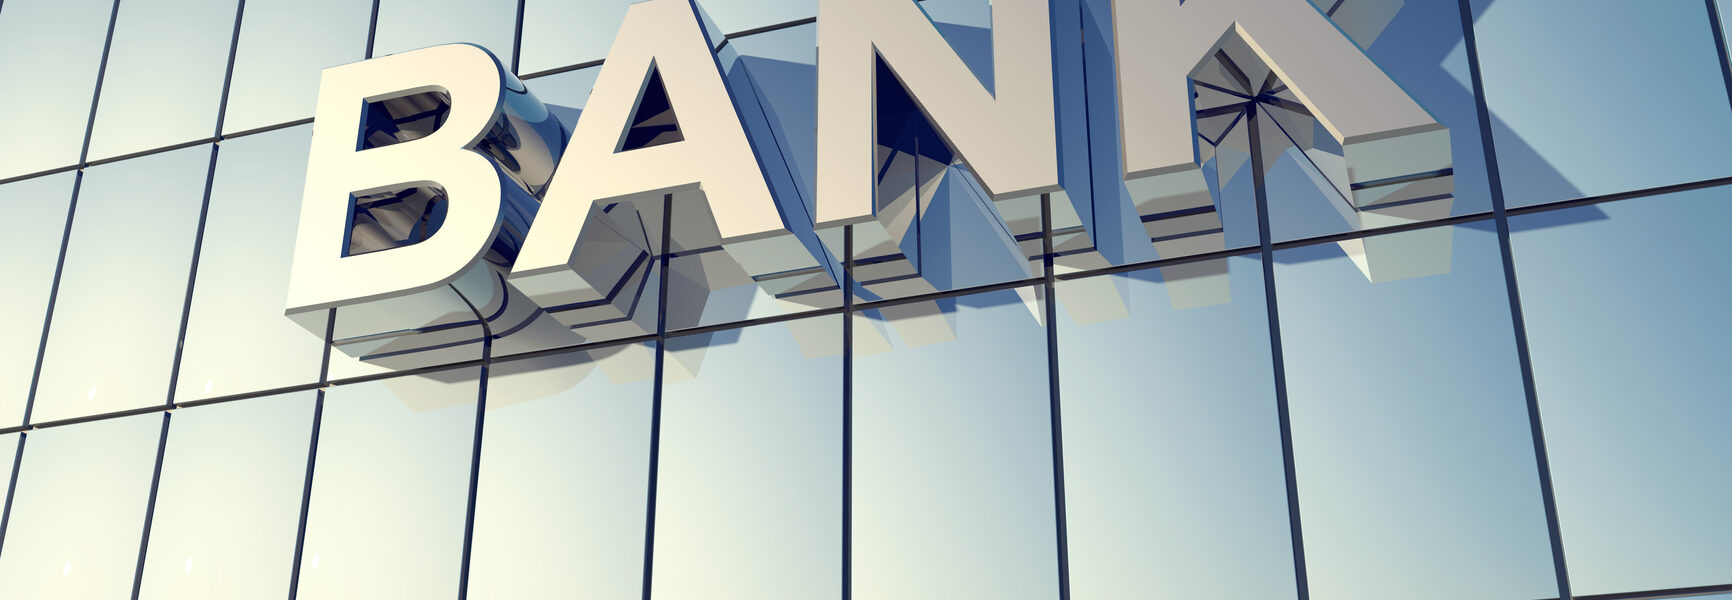 Angola’s National Bank Embraces SAP Innovations for Digital Transformation